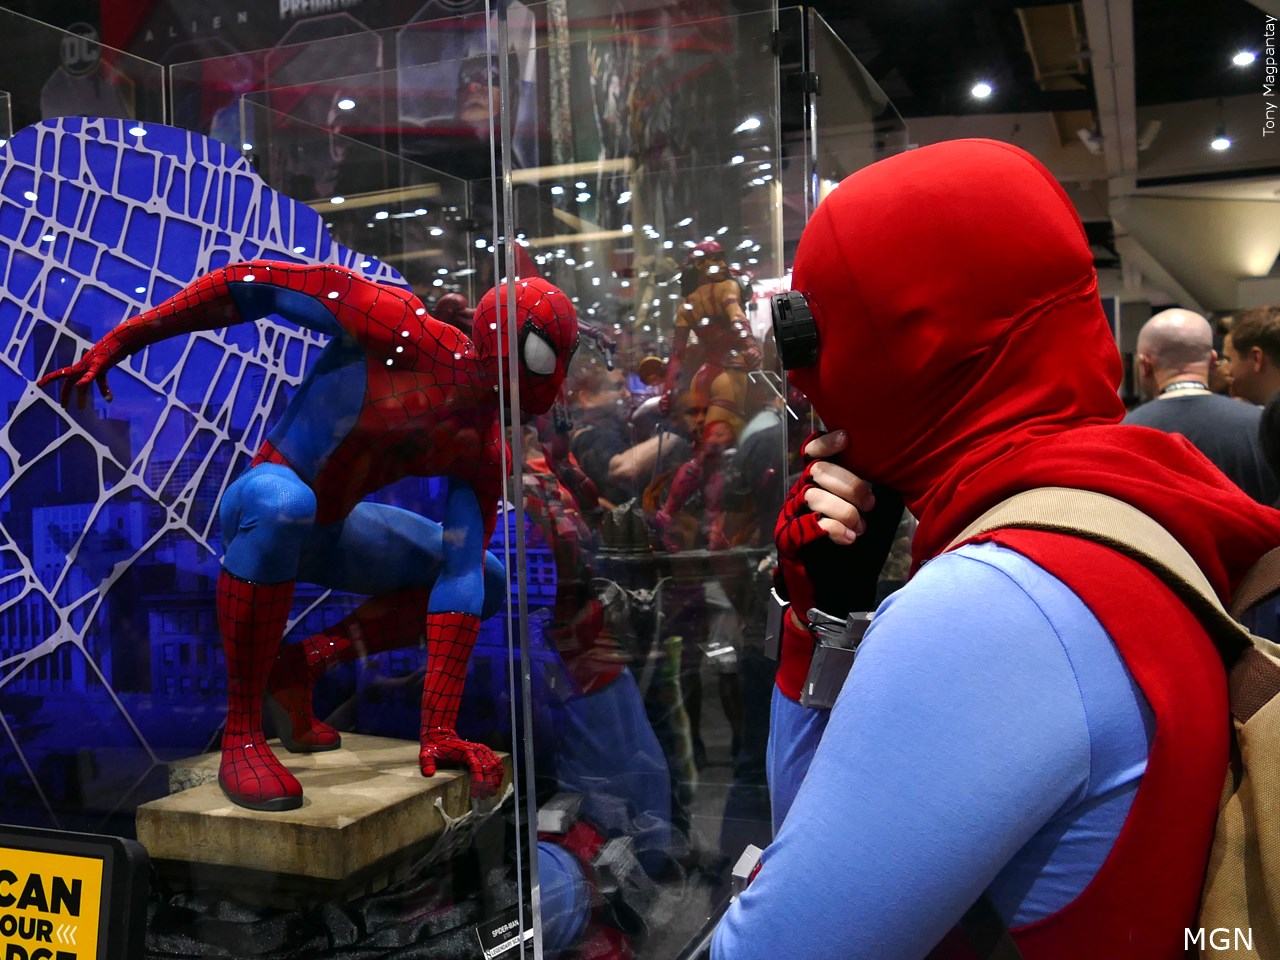 As Spider-Man turns 60, fans reflect on diverse appeal